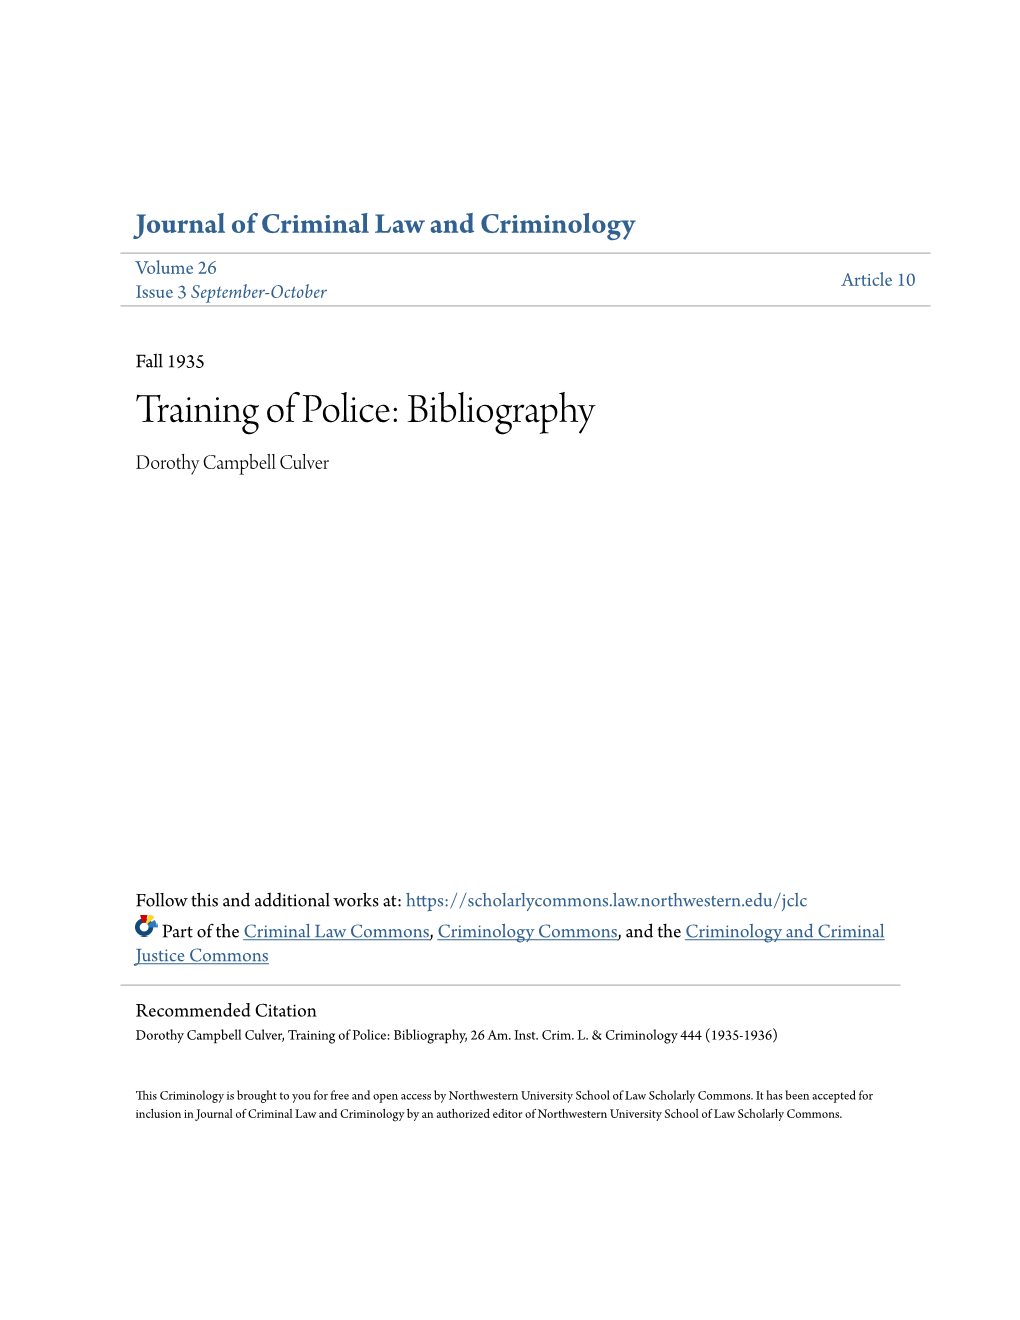 Training of Police: Bibliography Dorothy Campbell Culver